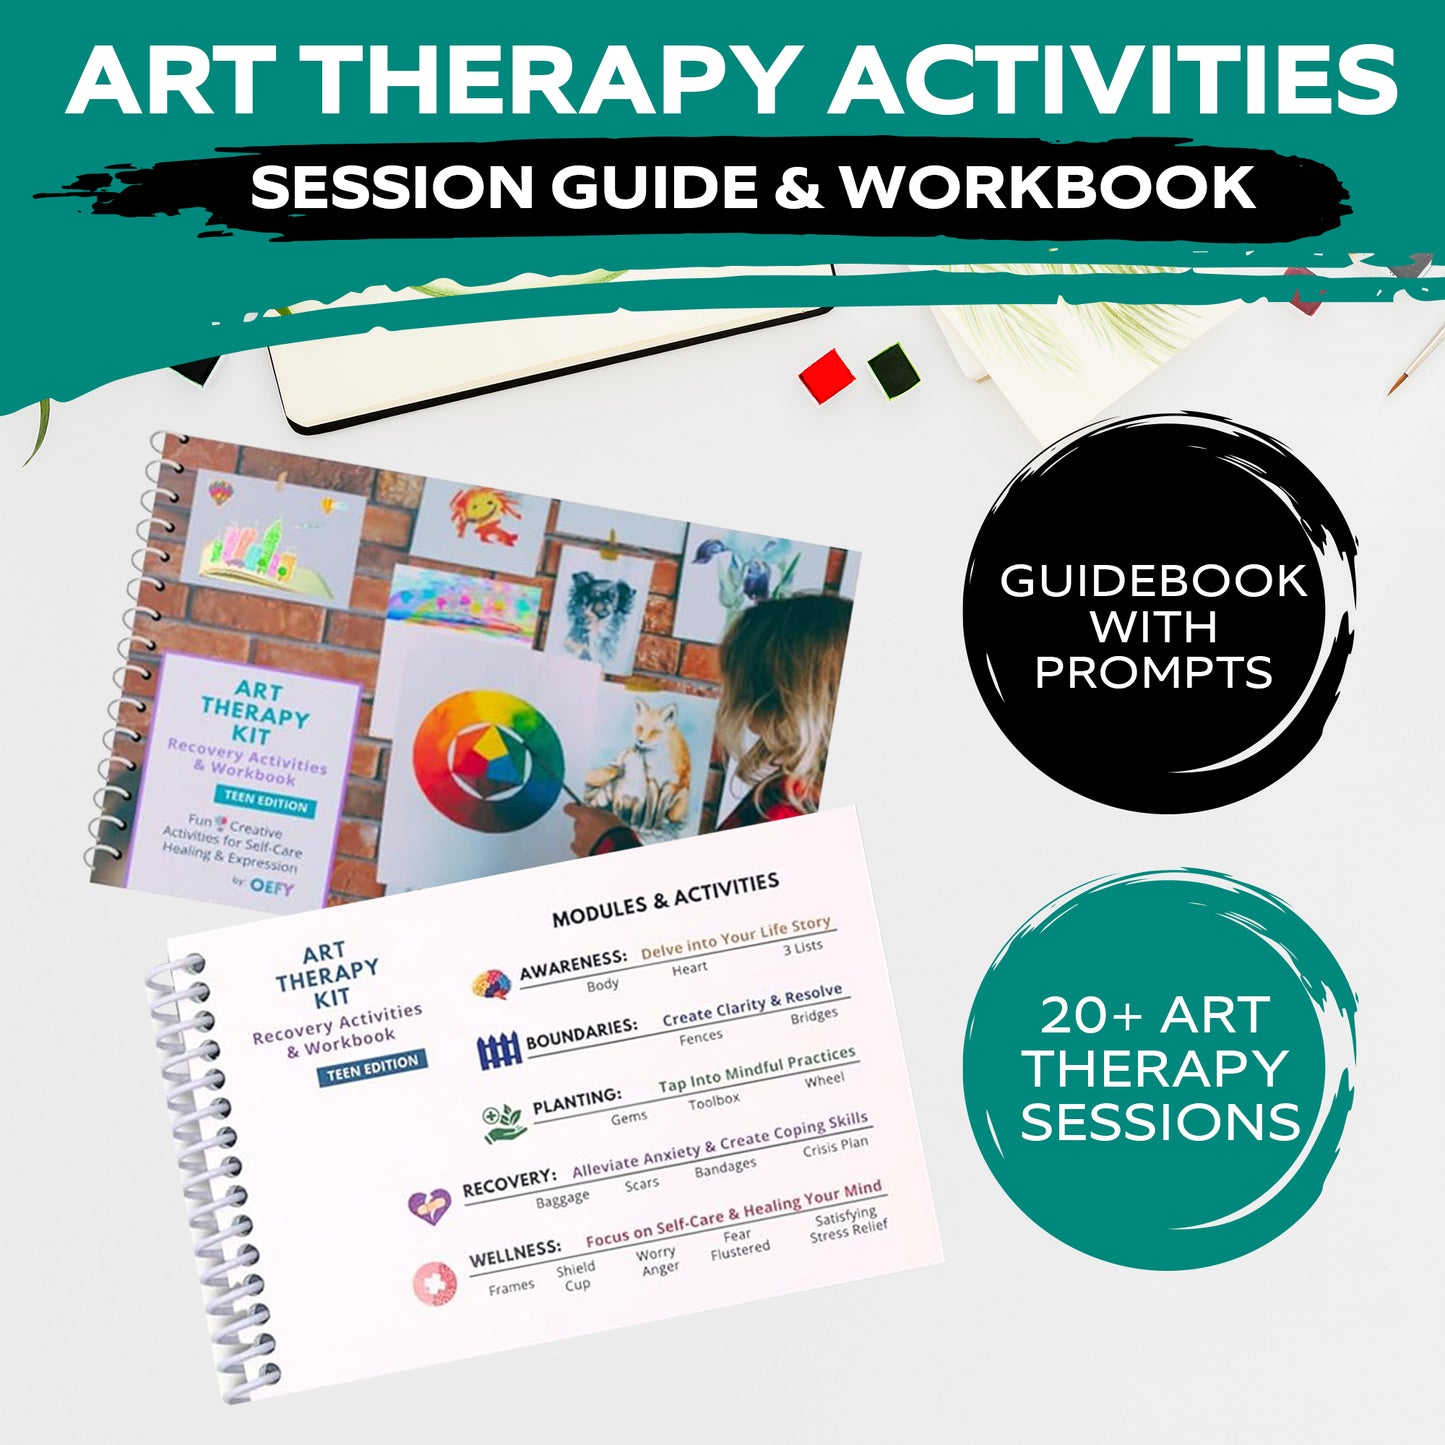 Art Therapy Activities Kit: 20+ Alternative Art Projects to Soothe Anxiety Coping Skills, Satisfying Art Therapy Activities, 175+ Art Supplies & Embellishments, Therapist Tools for Mental Health & Wellness (Pink Case)